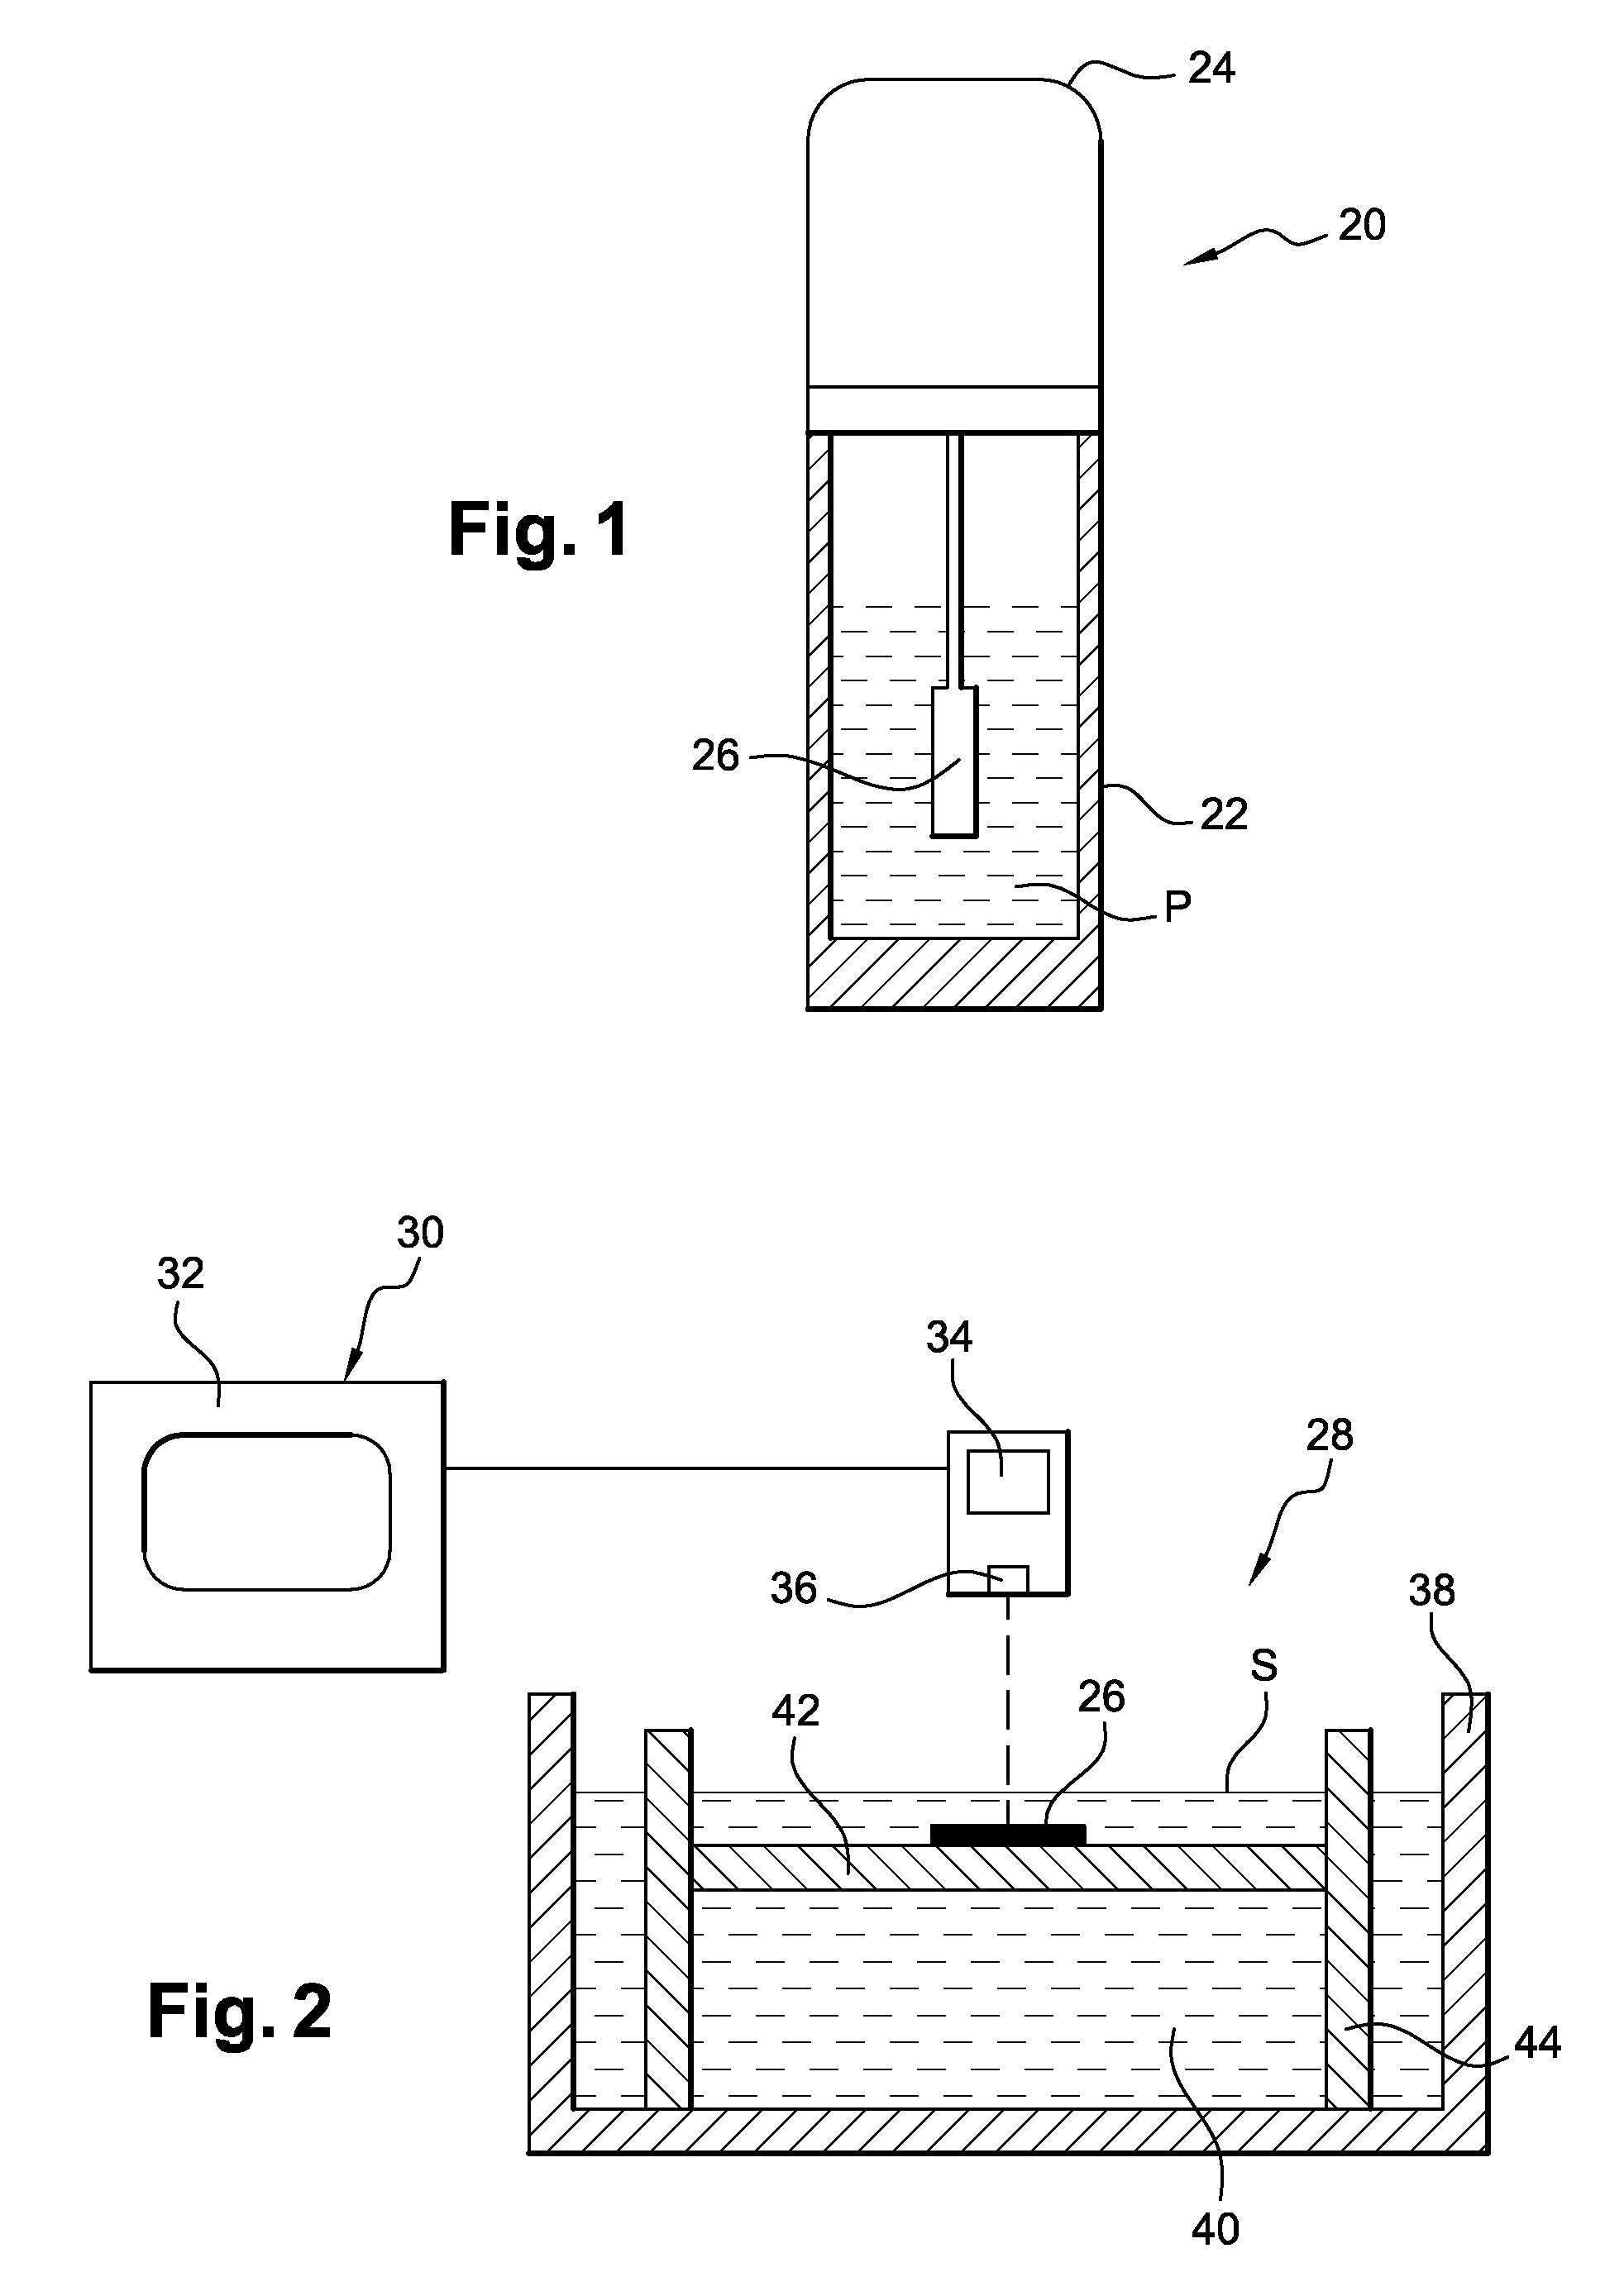 Method for manufacturing a cosmetic applicator, an applicator, a package including the applicator, and a batch of applicators